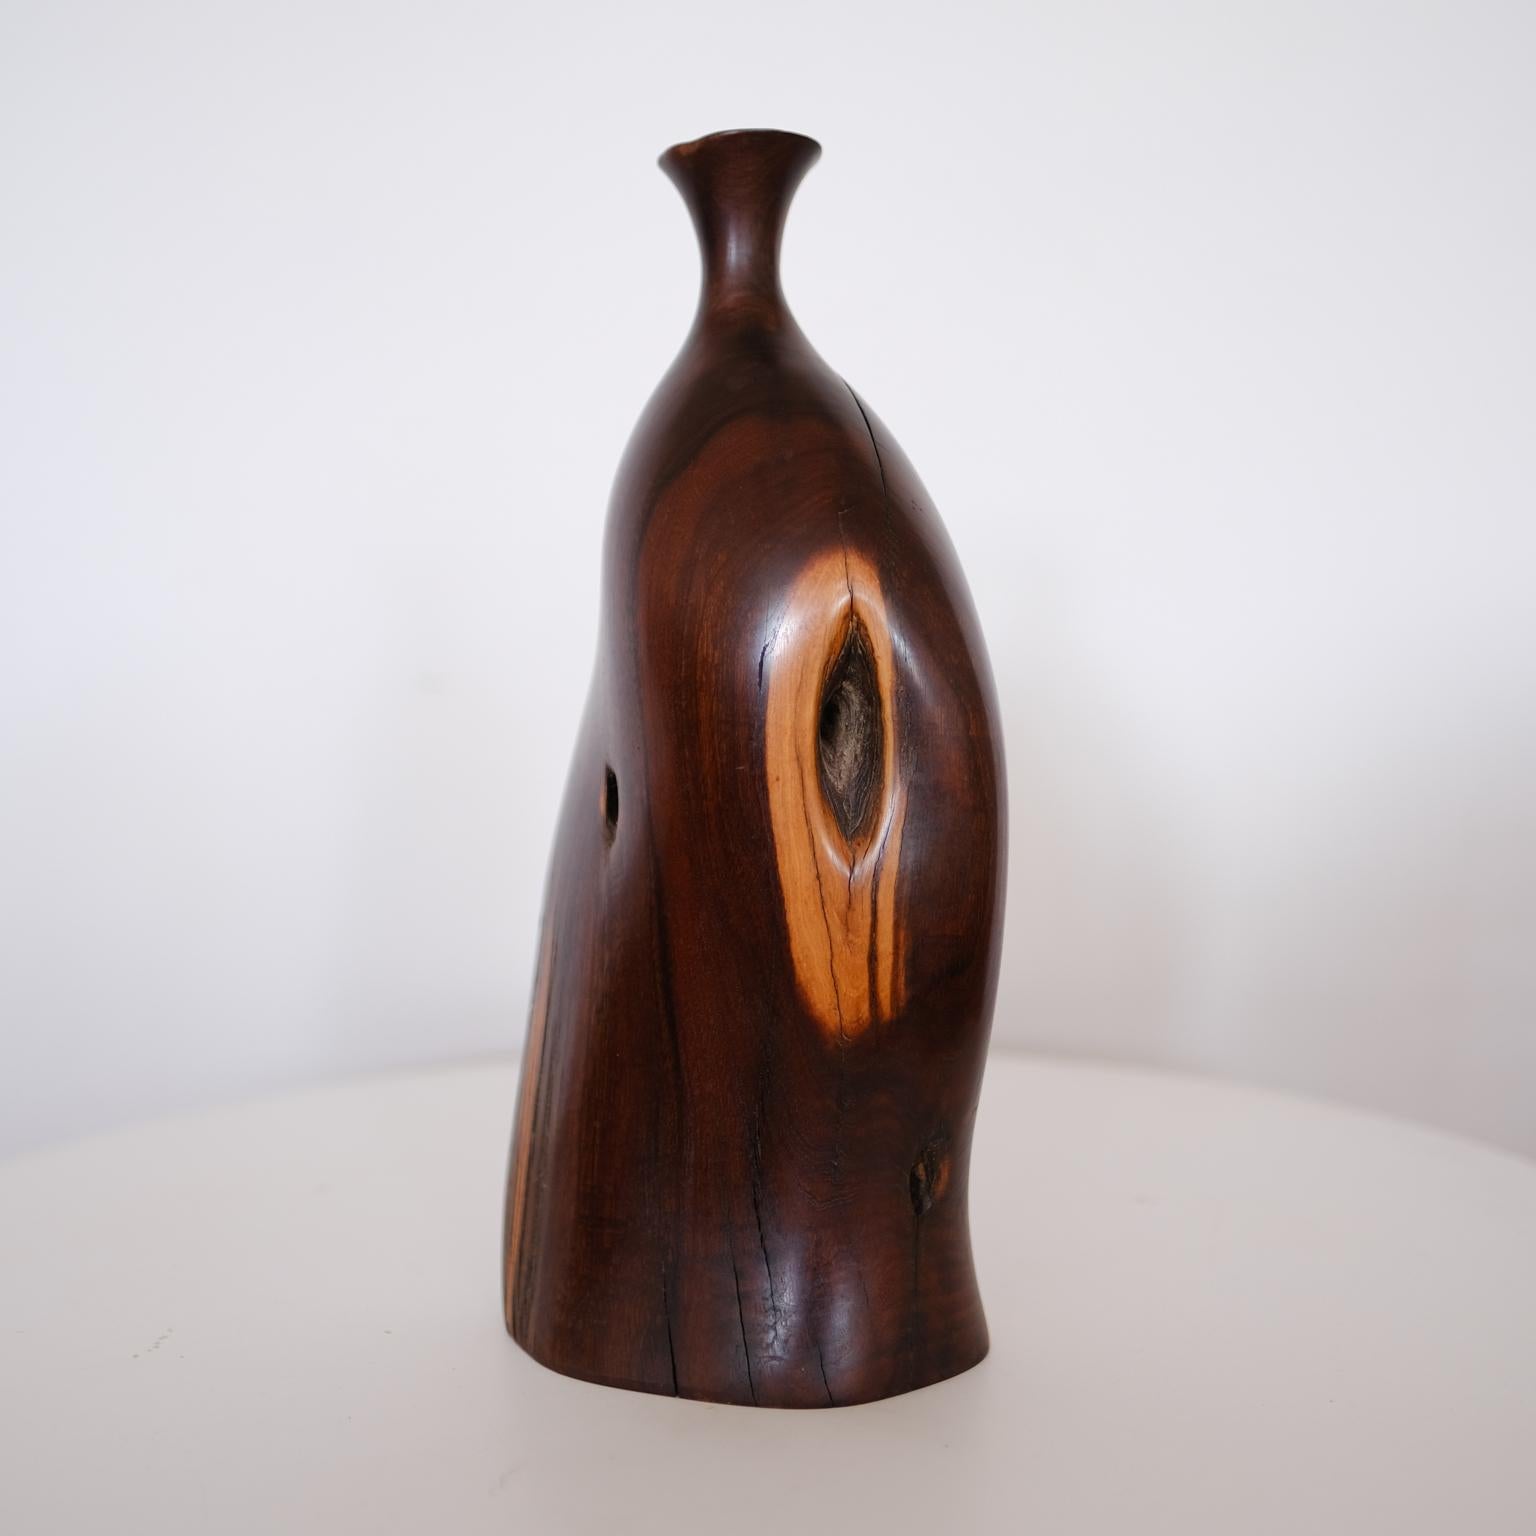 Bob Womack (b. 1947) sculptural wood vase. Crafted out of Tornillo wood. Signed and dated. USA, 1985

Awards and exhibitions:
Permanent Collection, Long Beach Museum of Art, Long Beach, California 2009
Permanent Collection, Figgie Art Museum,